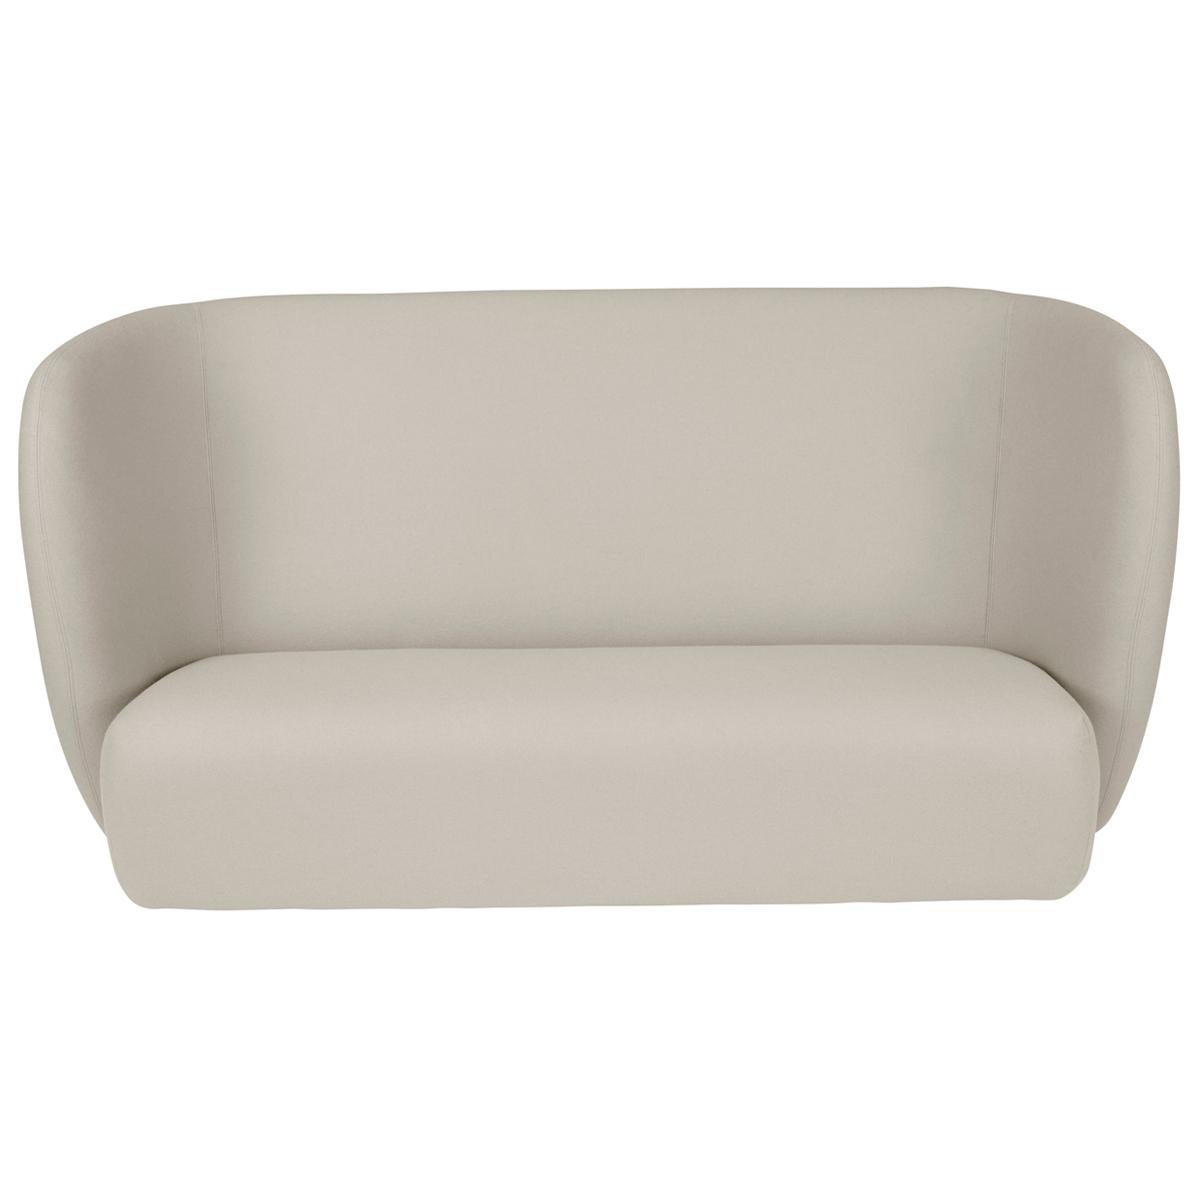 For Sale: Gray (Hero 211) Haven 3-Seat Sofa, by Charlotte Høncke from Warm Nordic